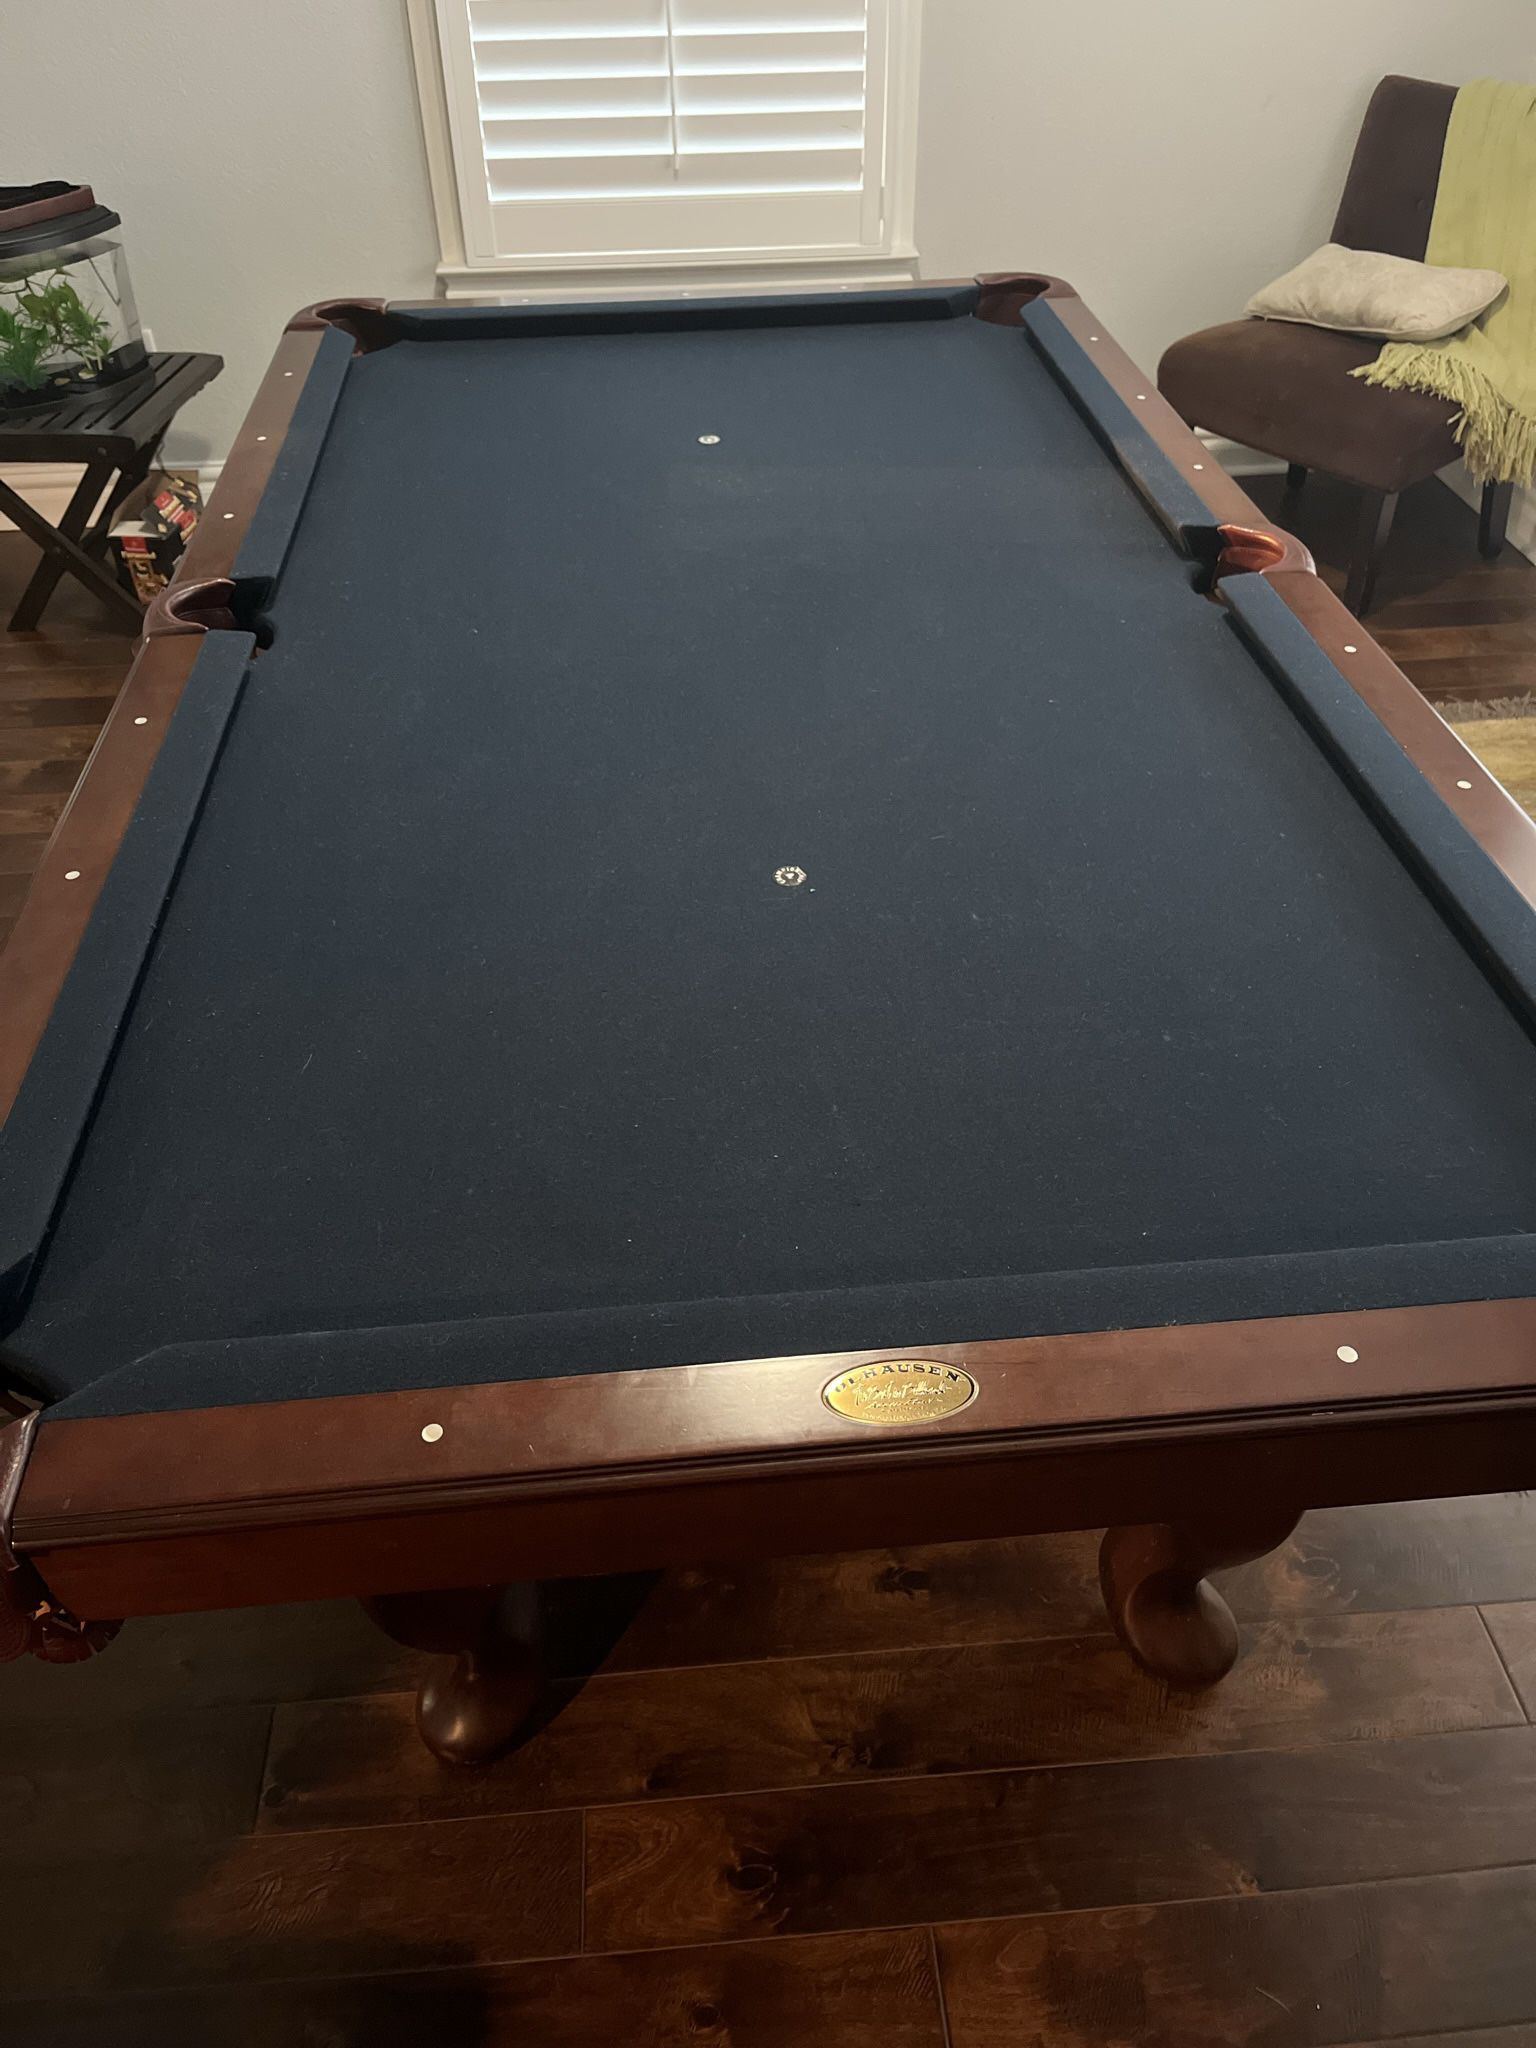 Ohlhausen 7’ Pool Table Excellent Condition 